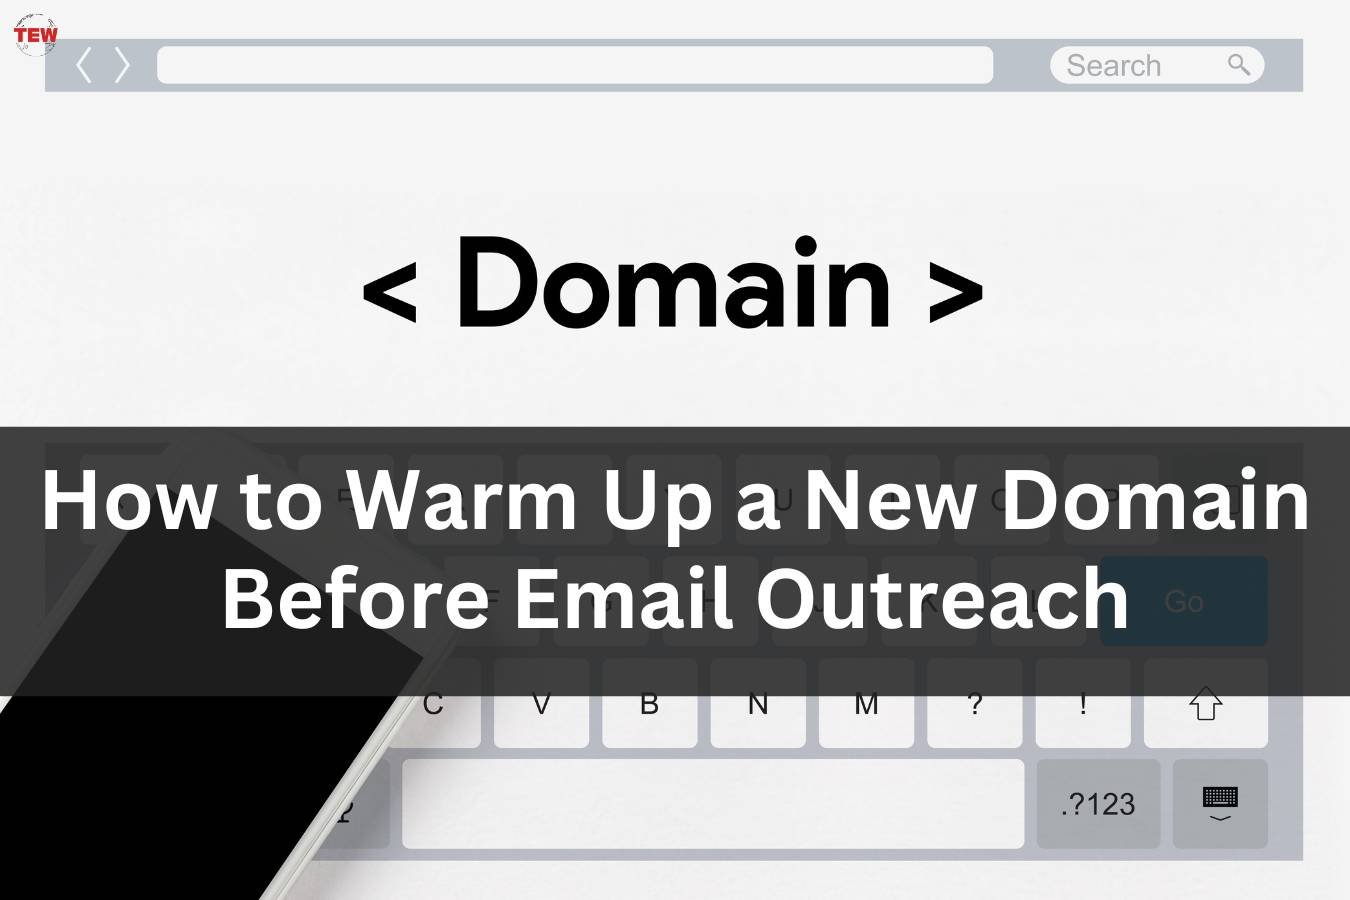 How to Warm Up a New Domain Before Email Outreach?